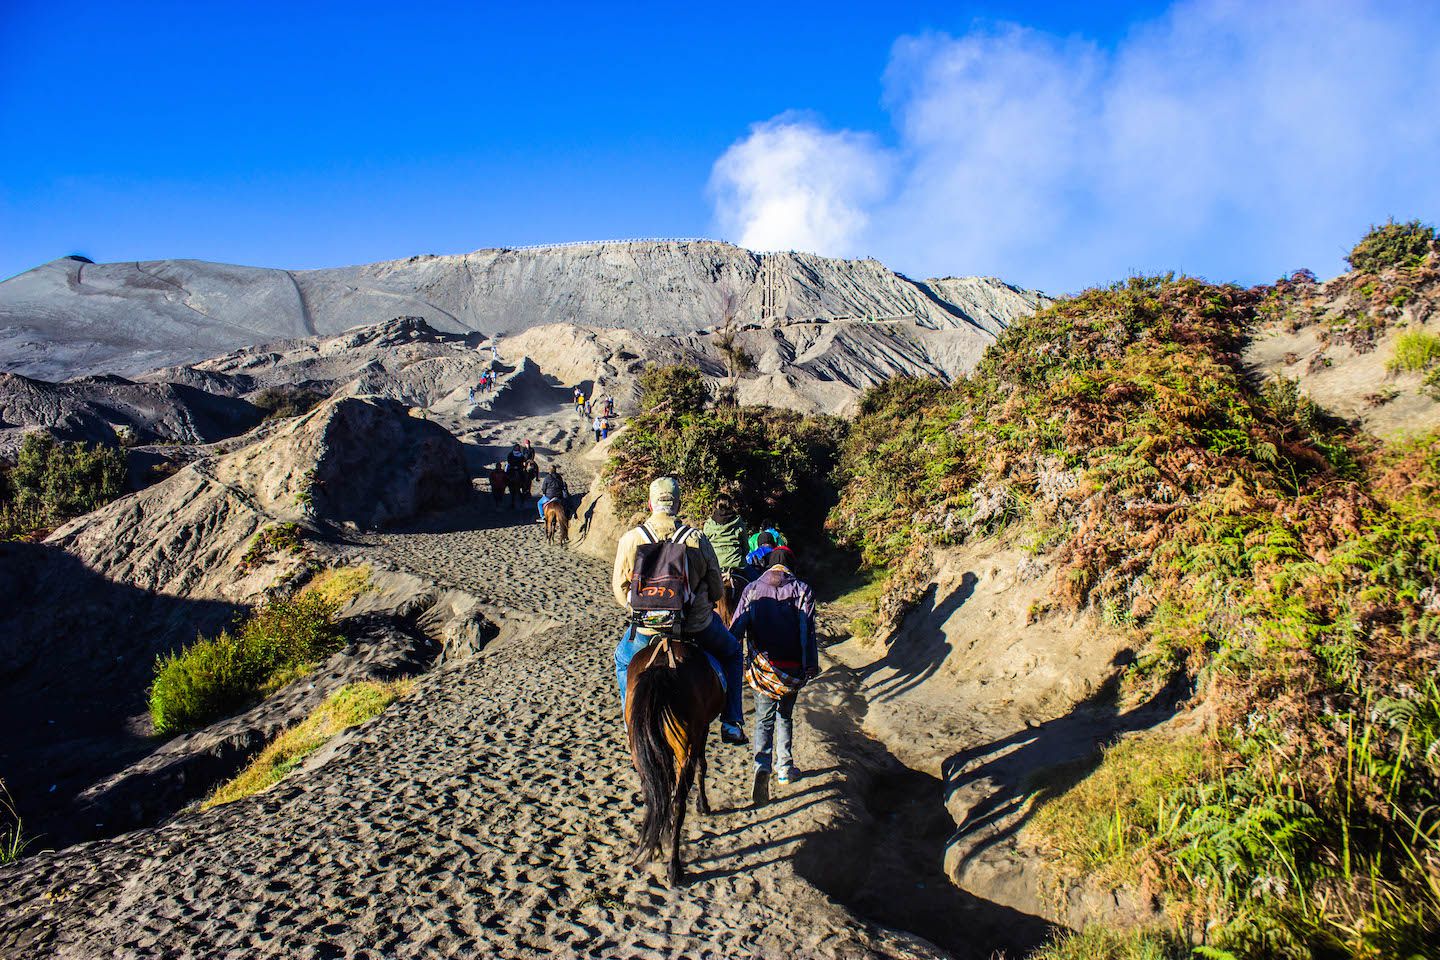 Horse walking up to the crater of Mt. Bromo, Indonesia